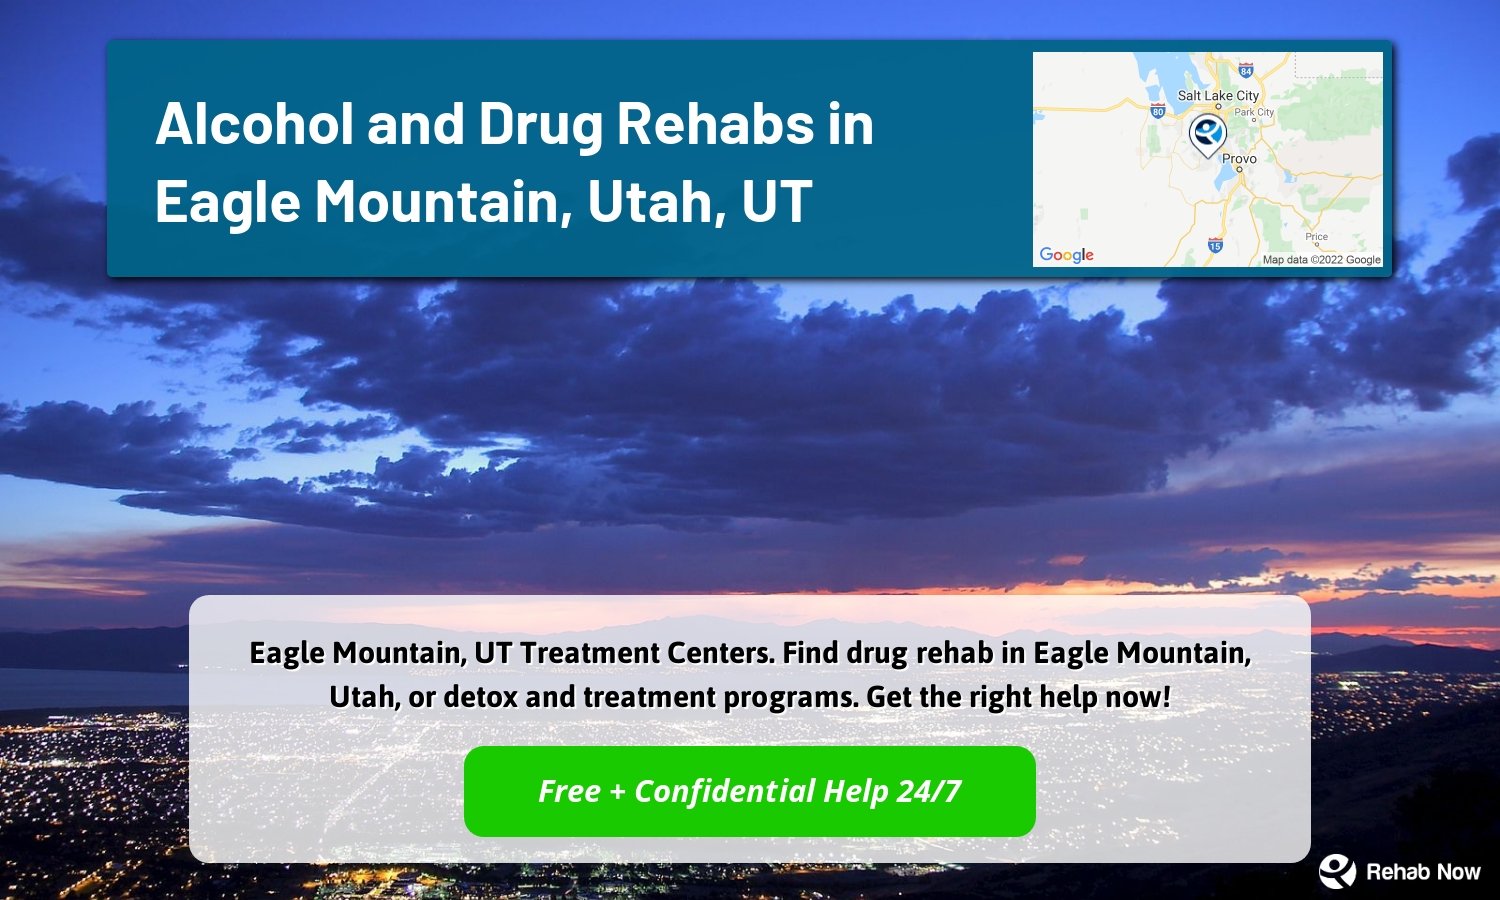 Eagle Mountain, UT Treatment Centers. Find drug rehab in Eagle Mountain, Utah, or detox and treatment programs. Get the right help now!